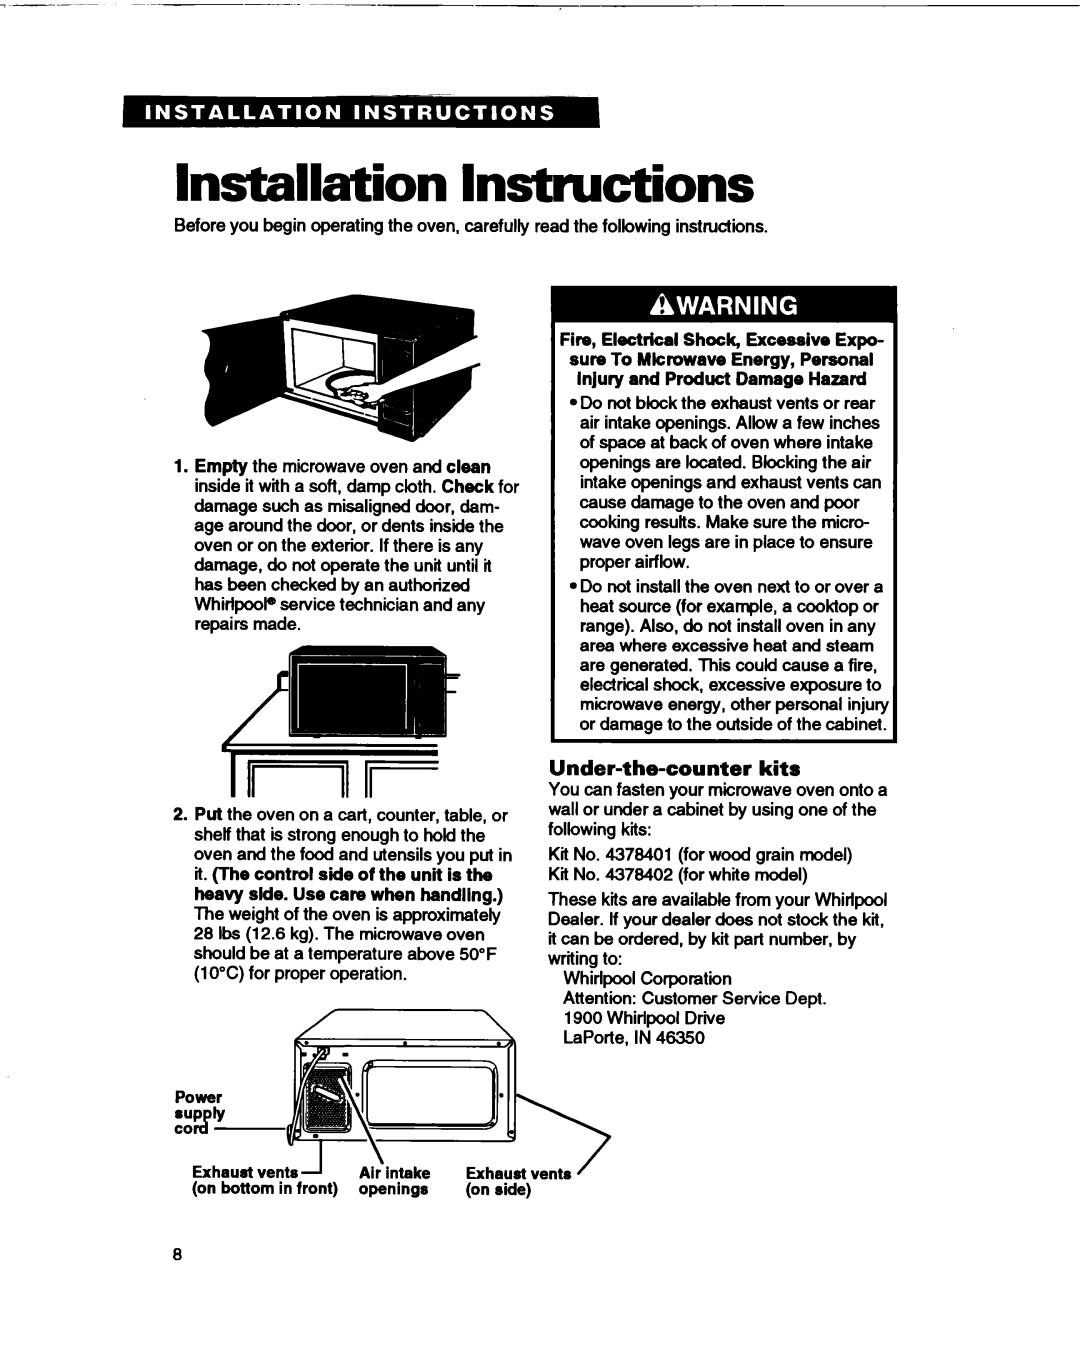 Whirlpool MT1061XB installation instructions Installation Instructions, Under-the-counterkits 